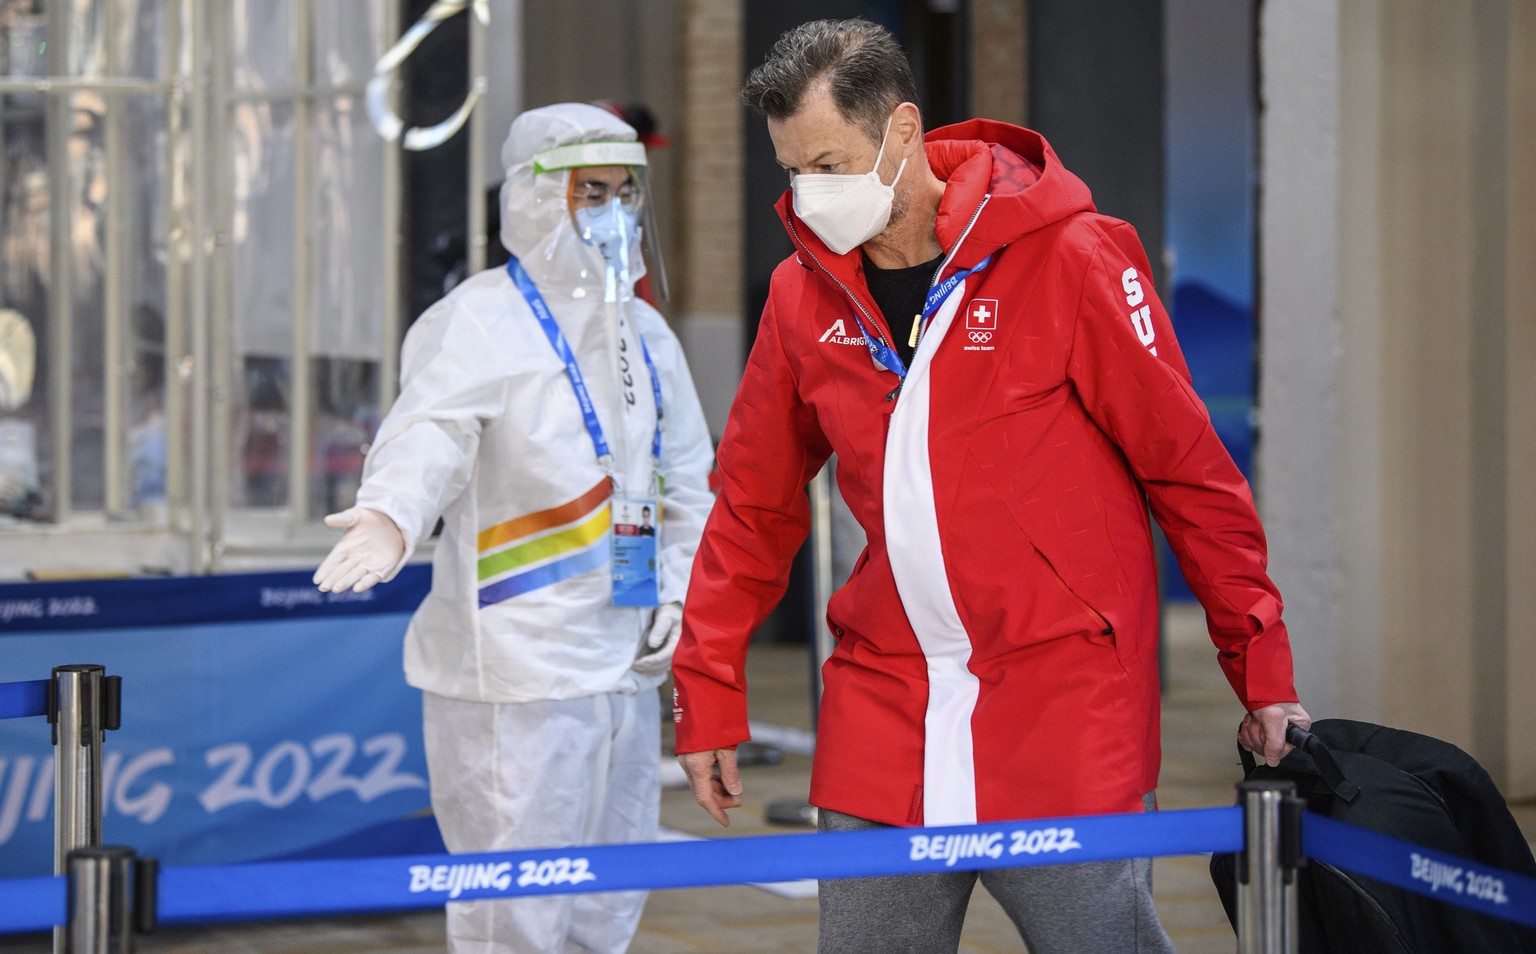 A member of Team Switzerland walks past security as he arrives at the Olympic Village ahead of the 2022 Winter Olympics, Tuesday, Feb. 1, 2022, in Beijing. (Anthony Wallace/Pool Photo via AP)